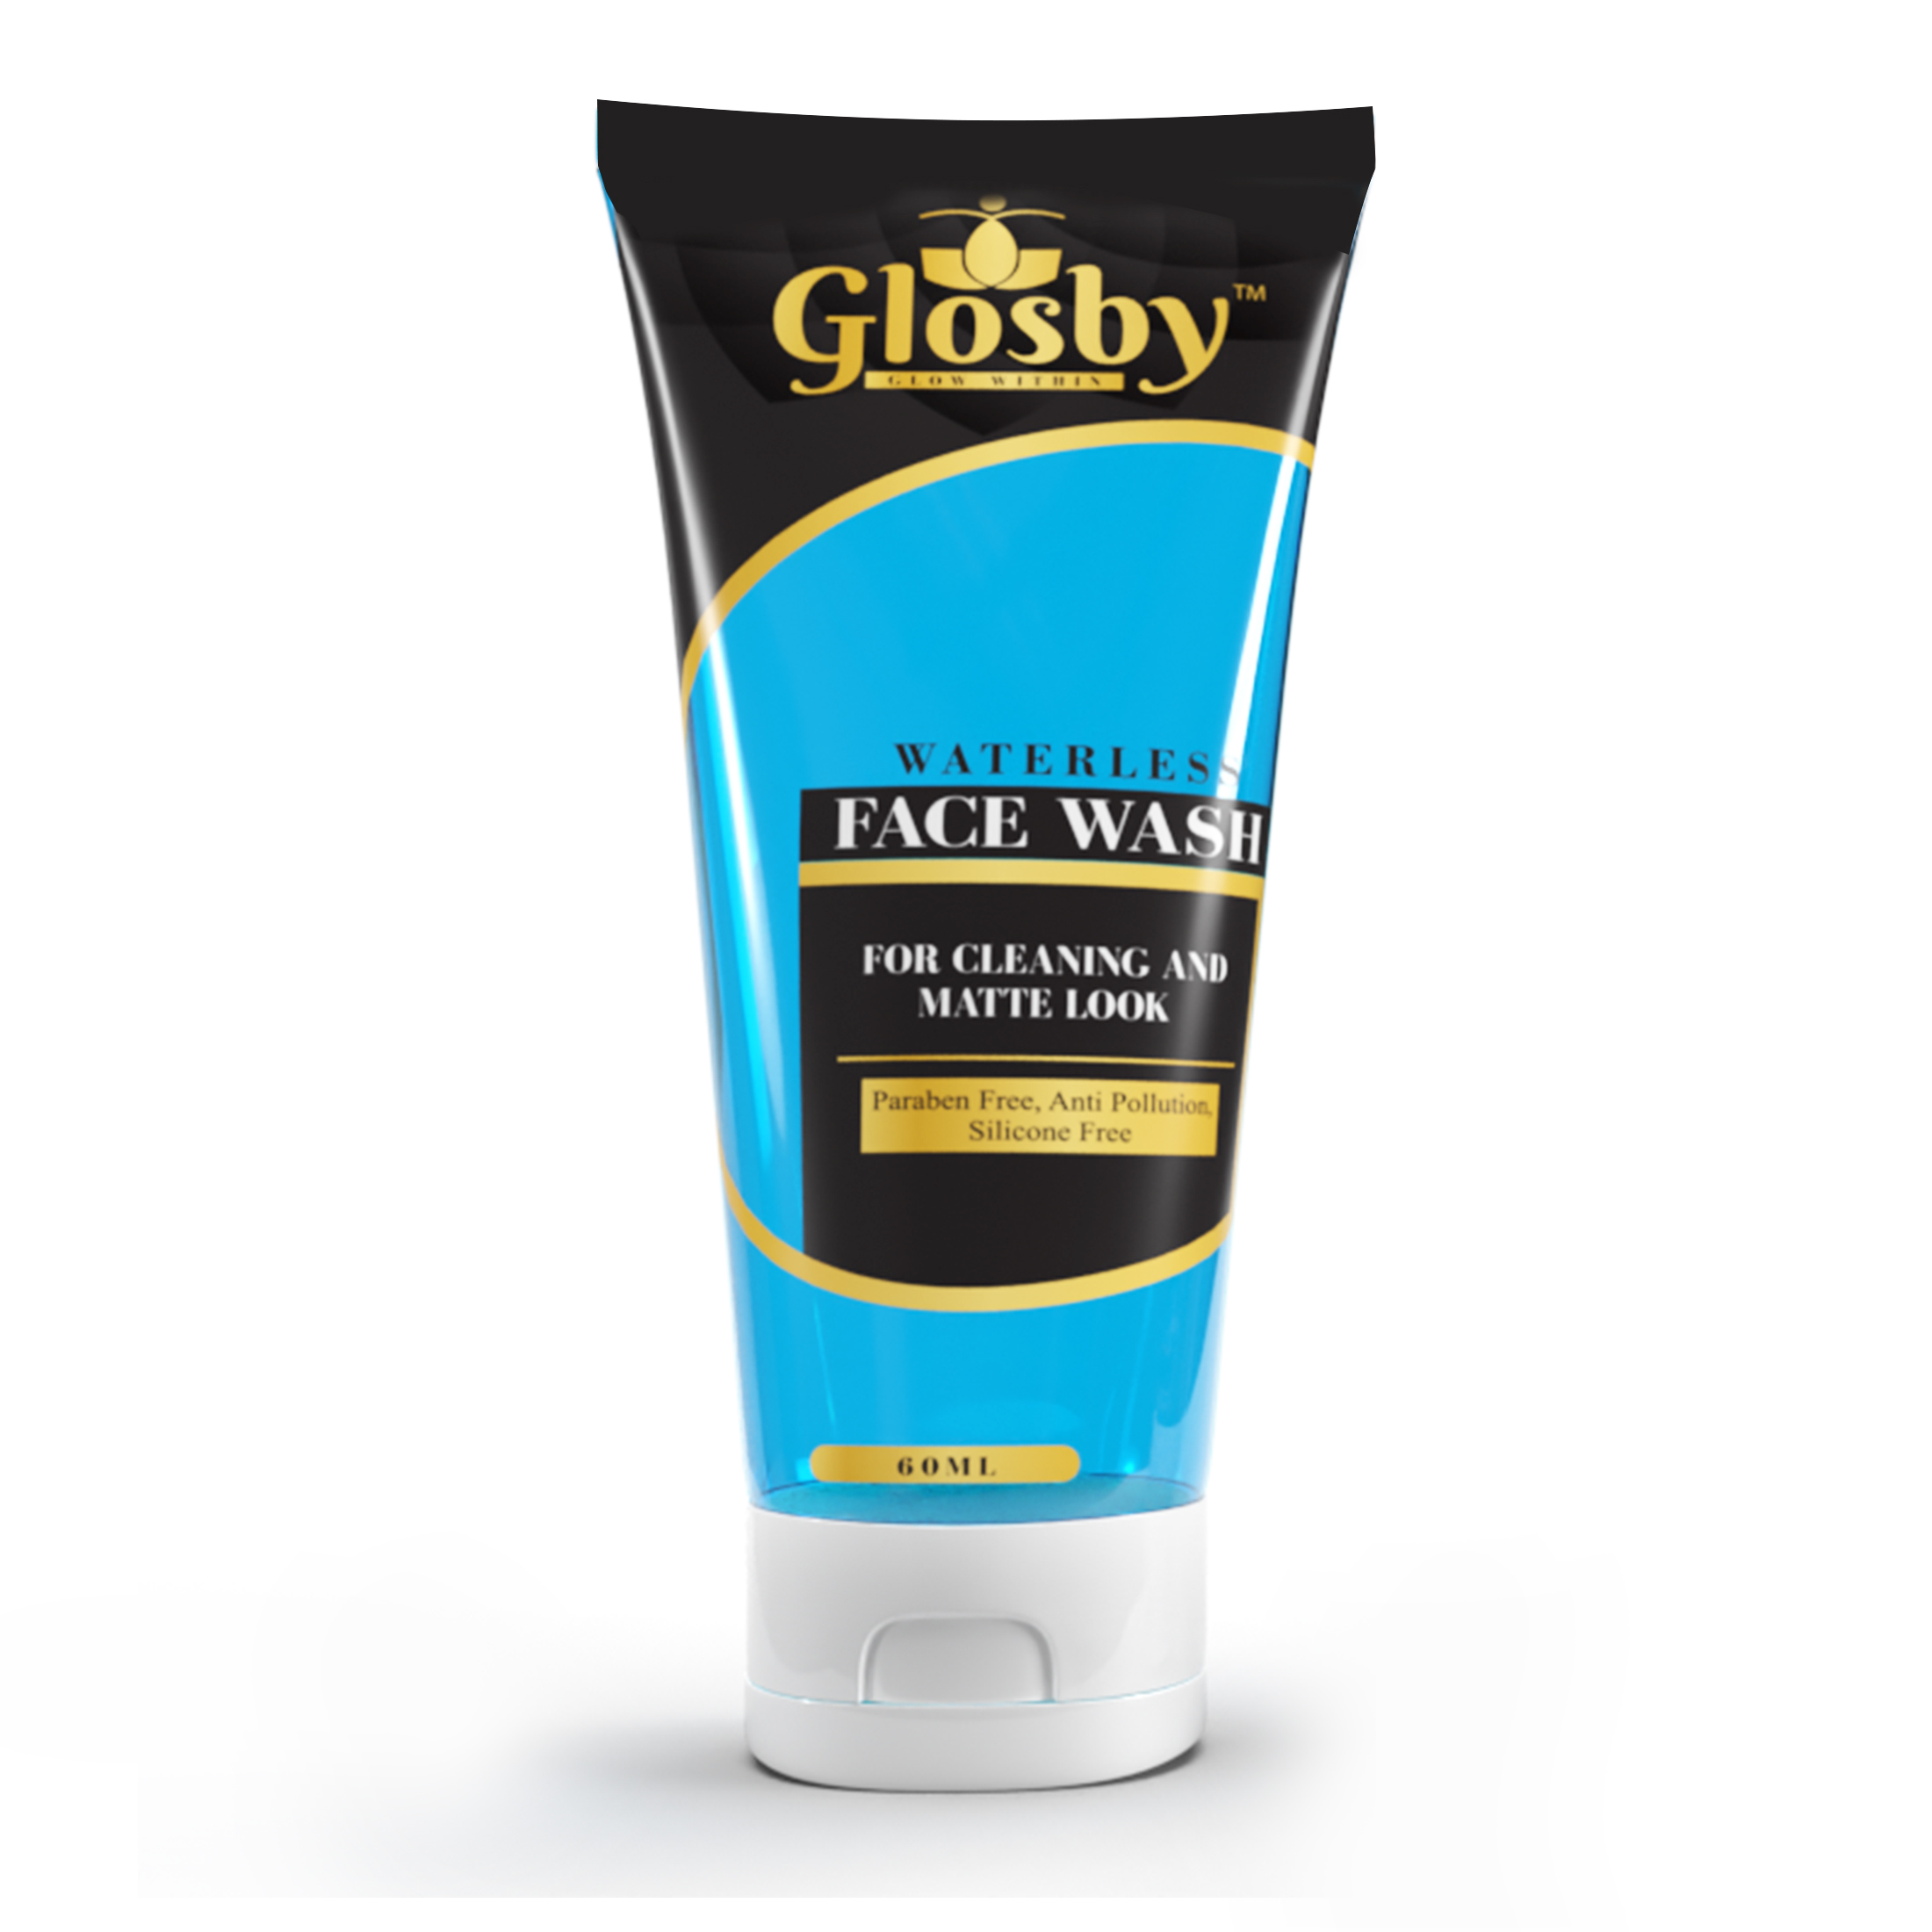 Glosby Waterless Face Wash